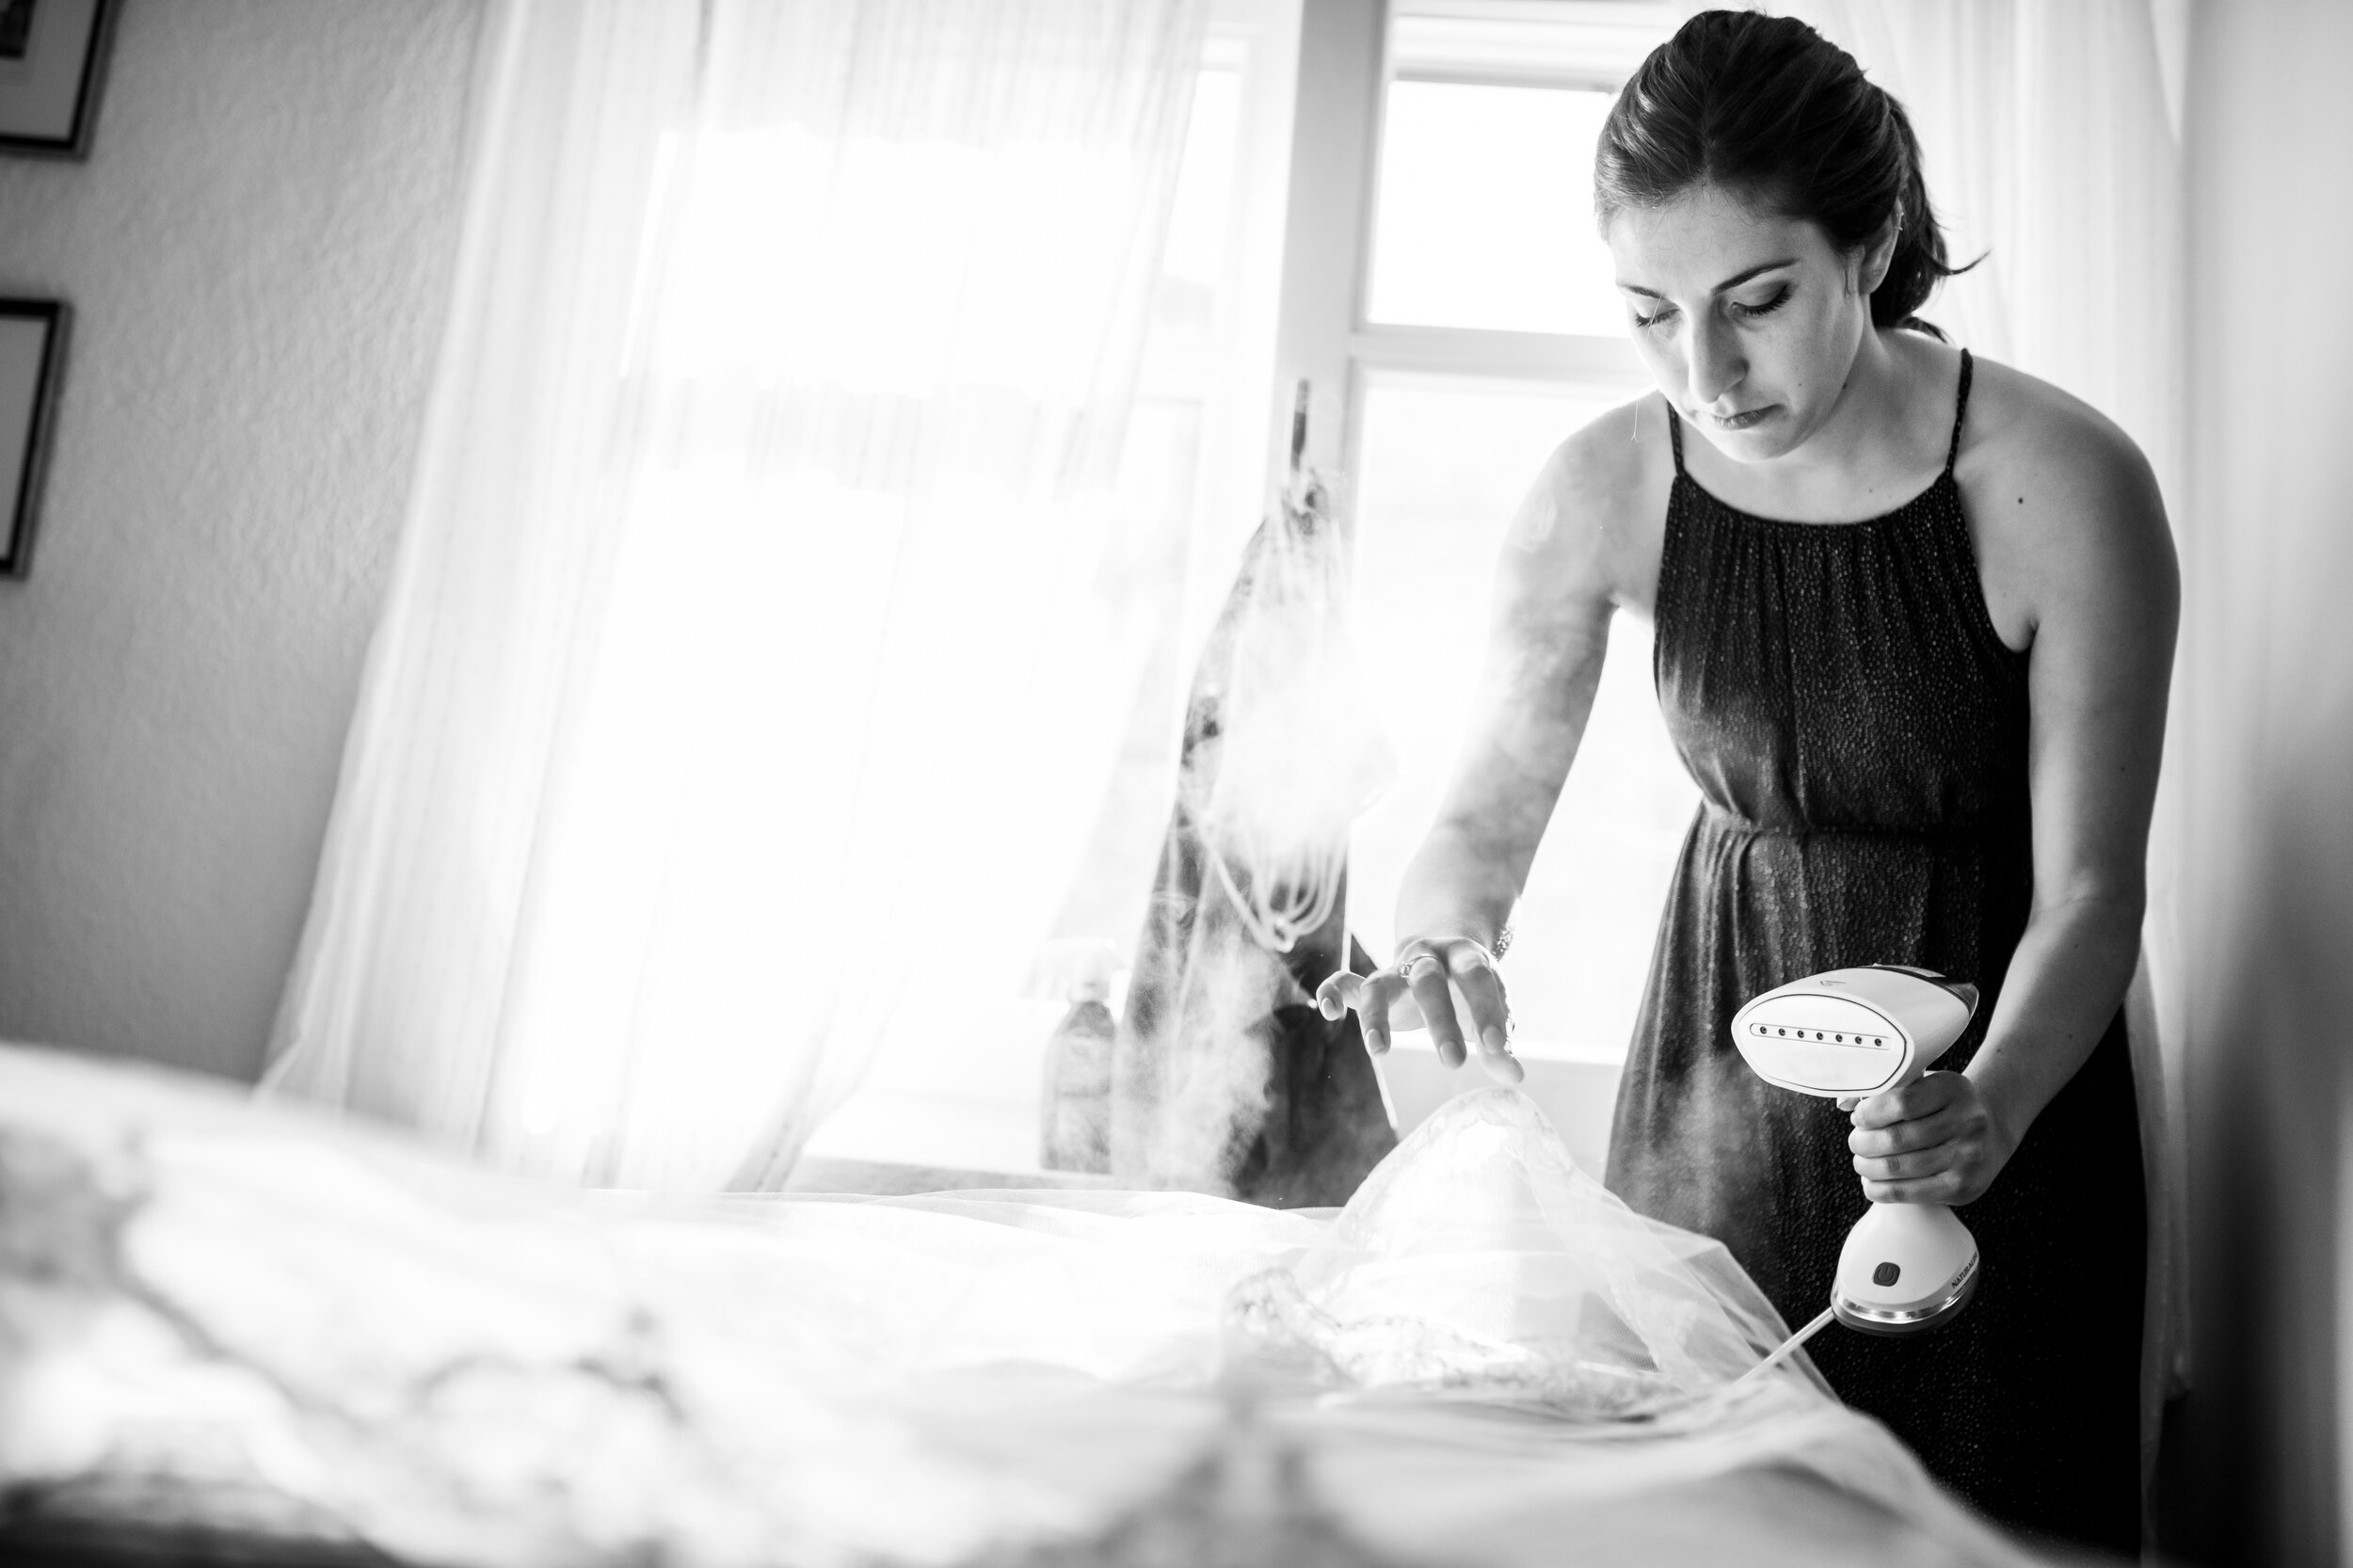 Sister of the bride steam irons the veil: destination wedding photo at the Lost Unicorn Hotel, Tsagarada, Greece by J. Brown Photography.